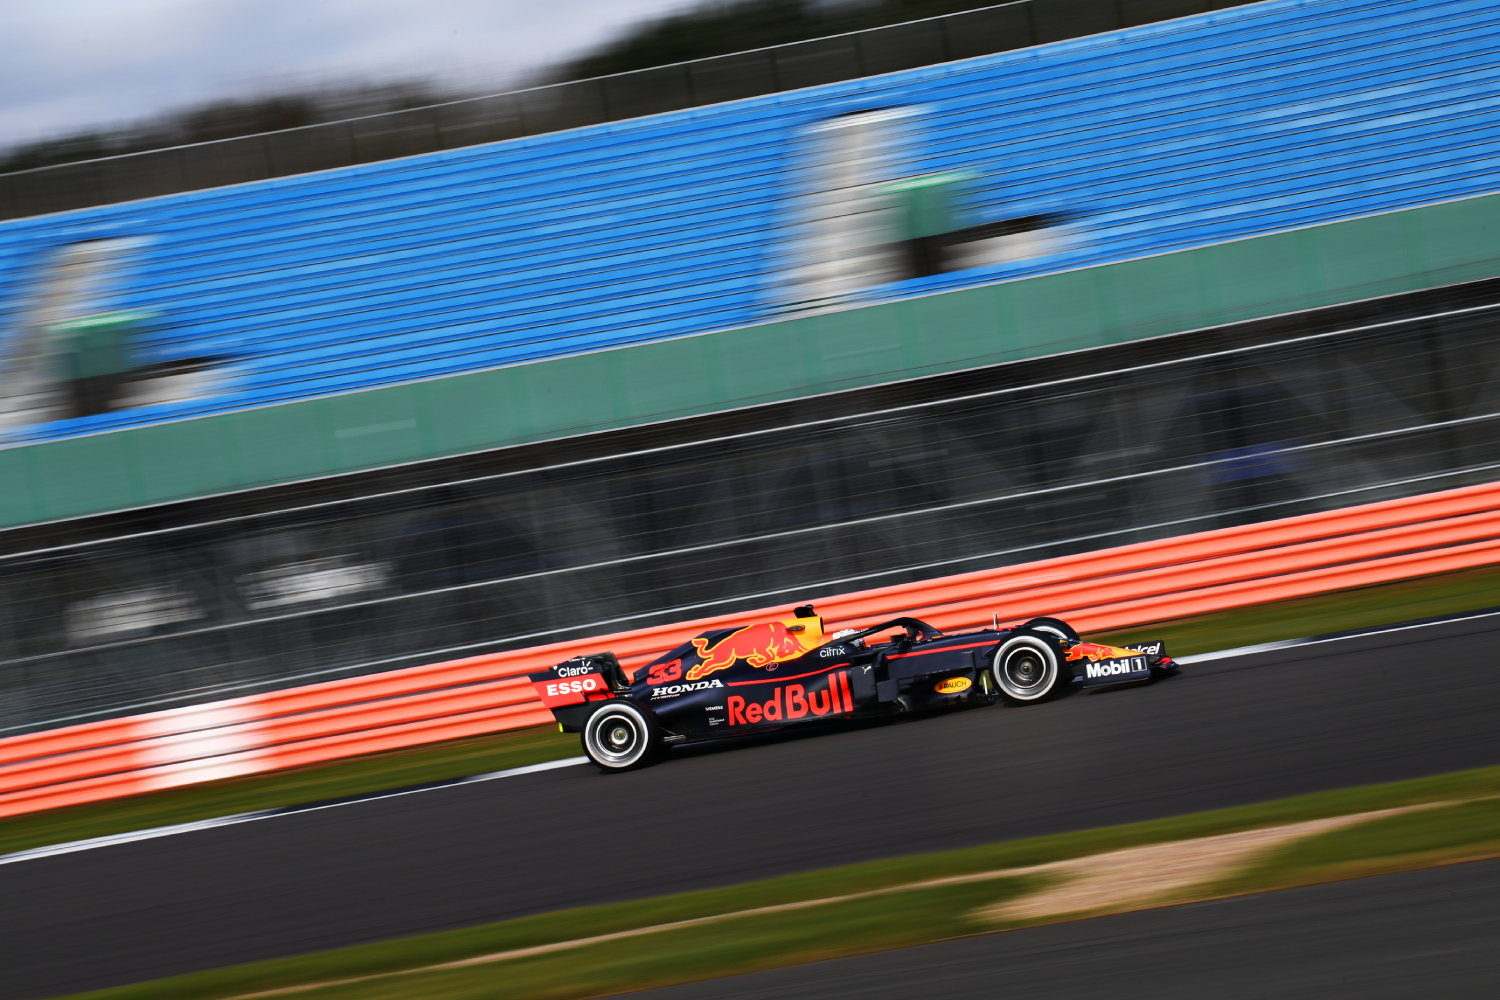 A Red Bull Racing Formula 1 car driving down the track.